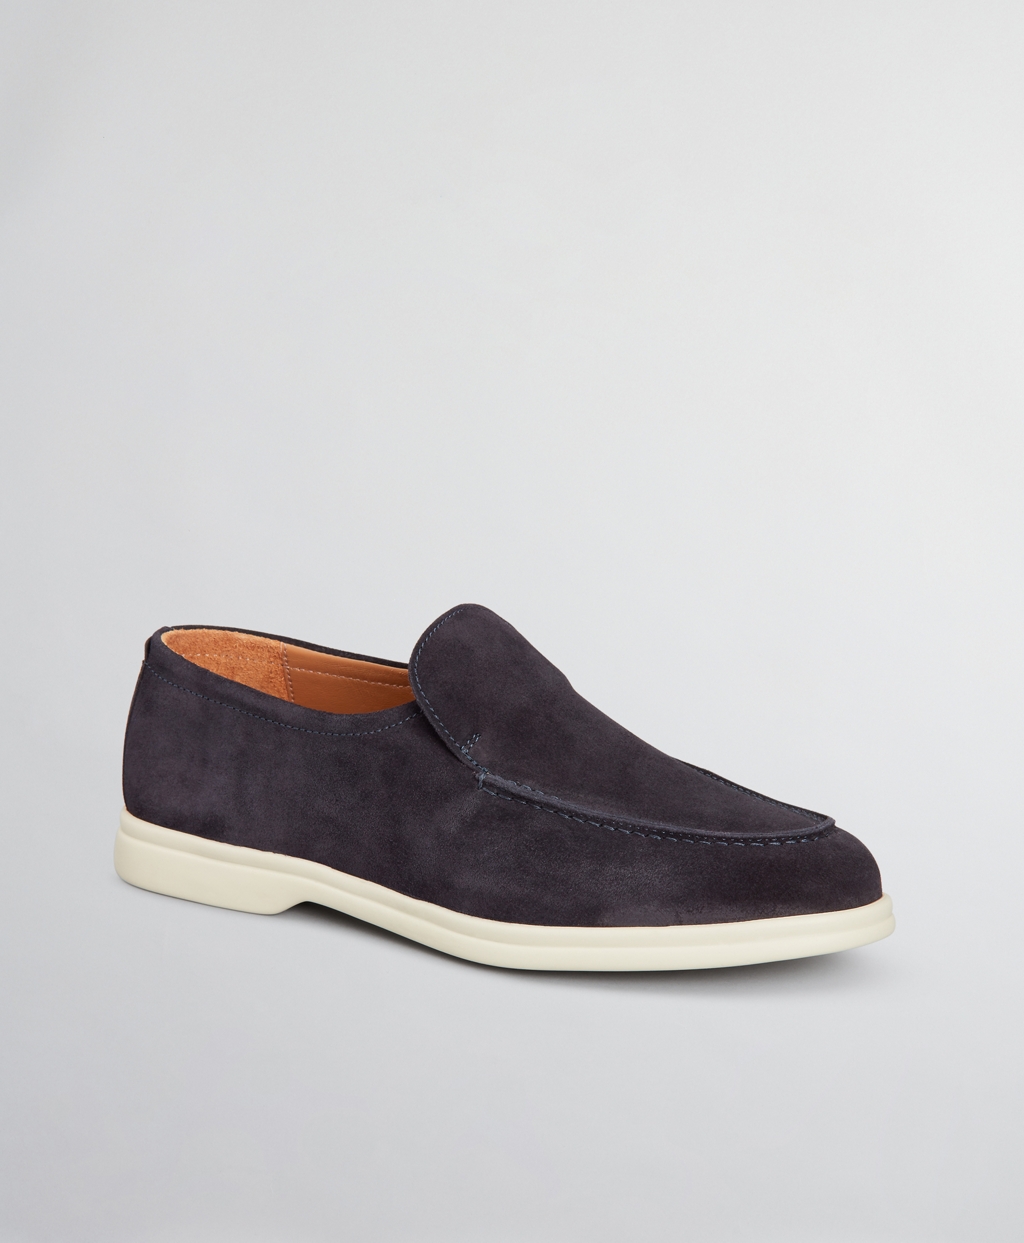 The Brooks Brothers Voyager 1 Shoe - Suede